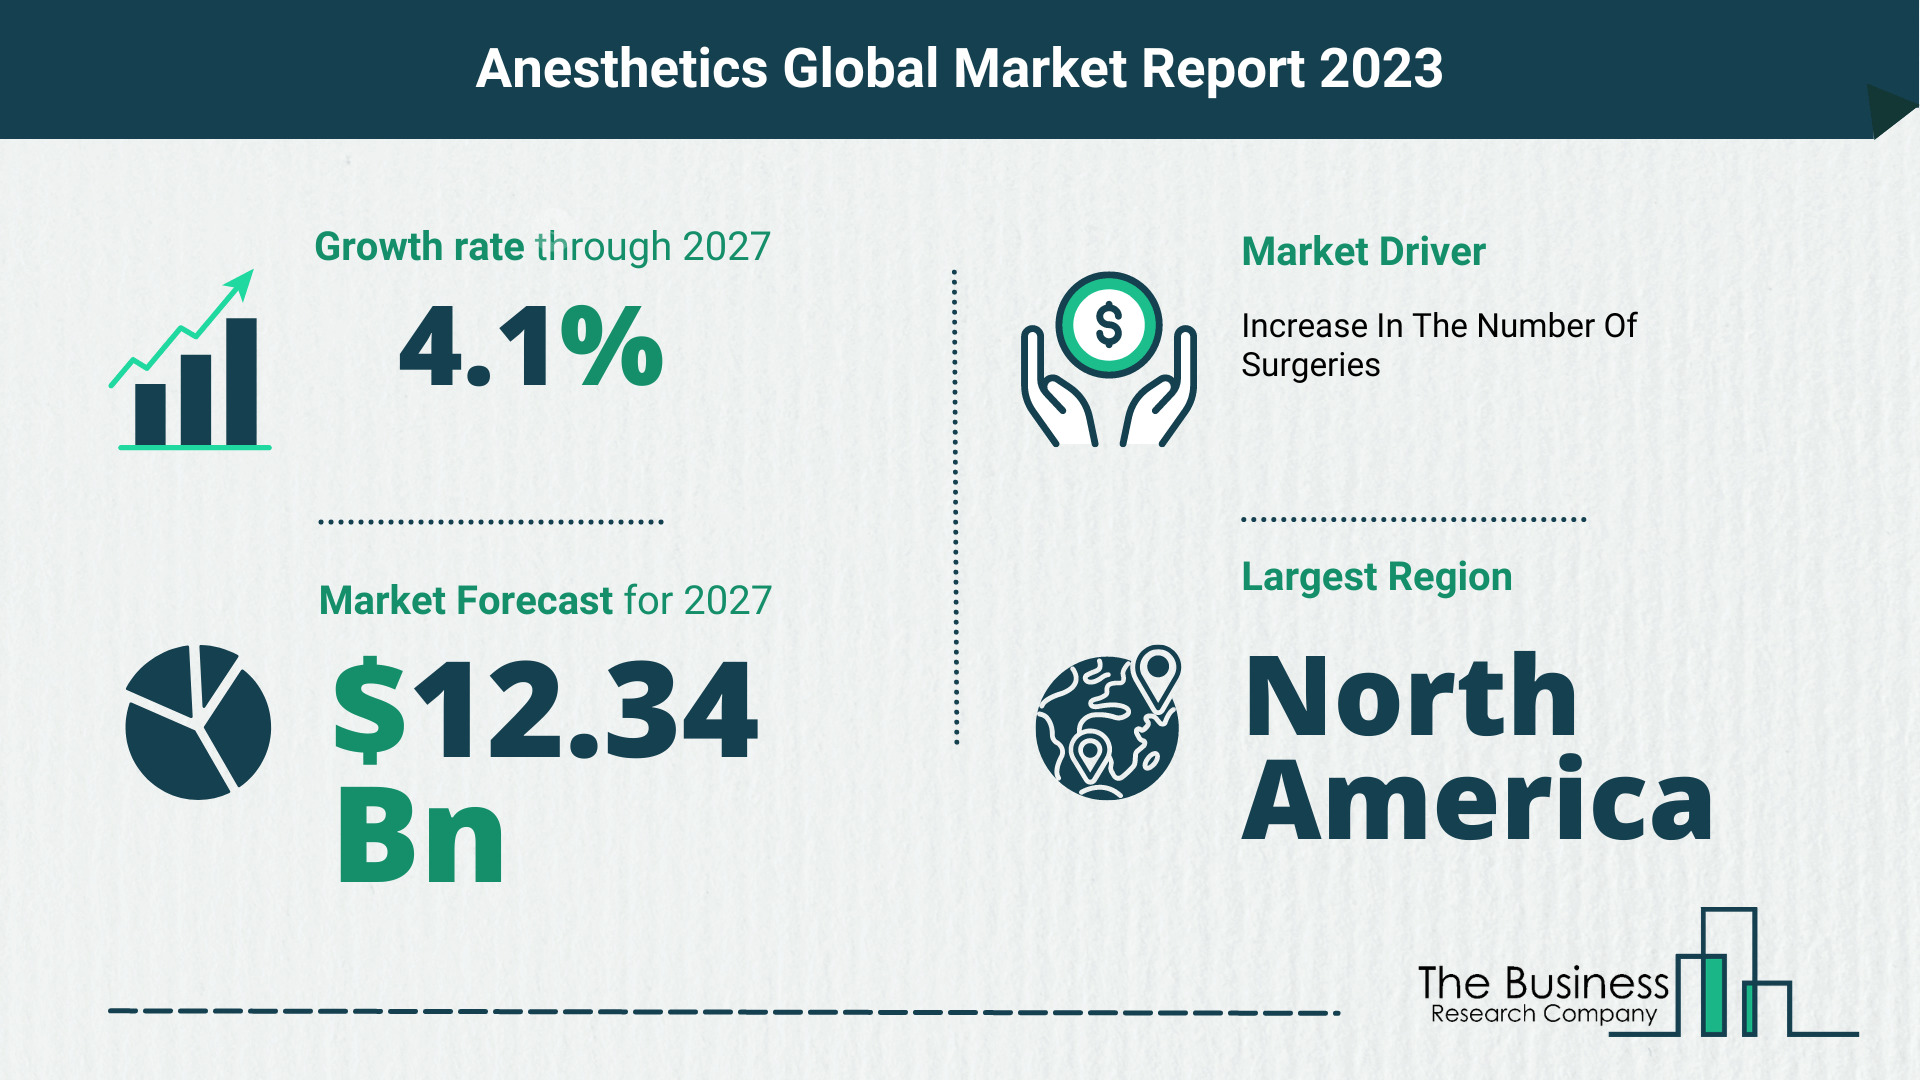 How Will The Anesthetics Market Globally Expand In 2023?